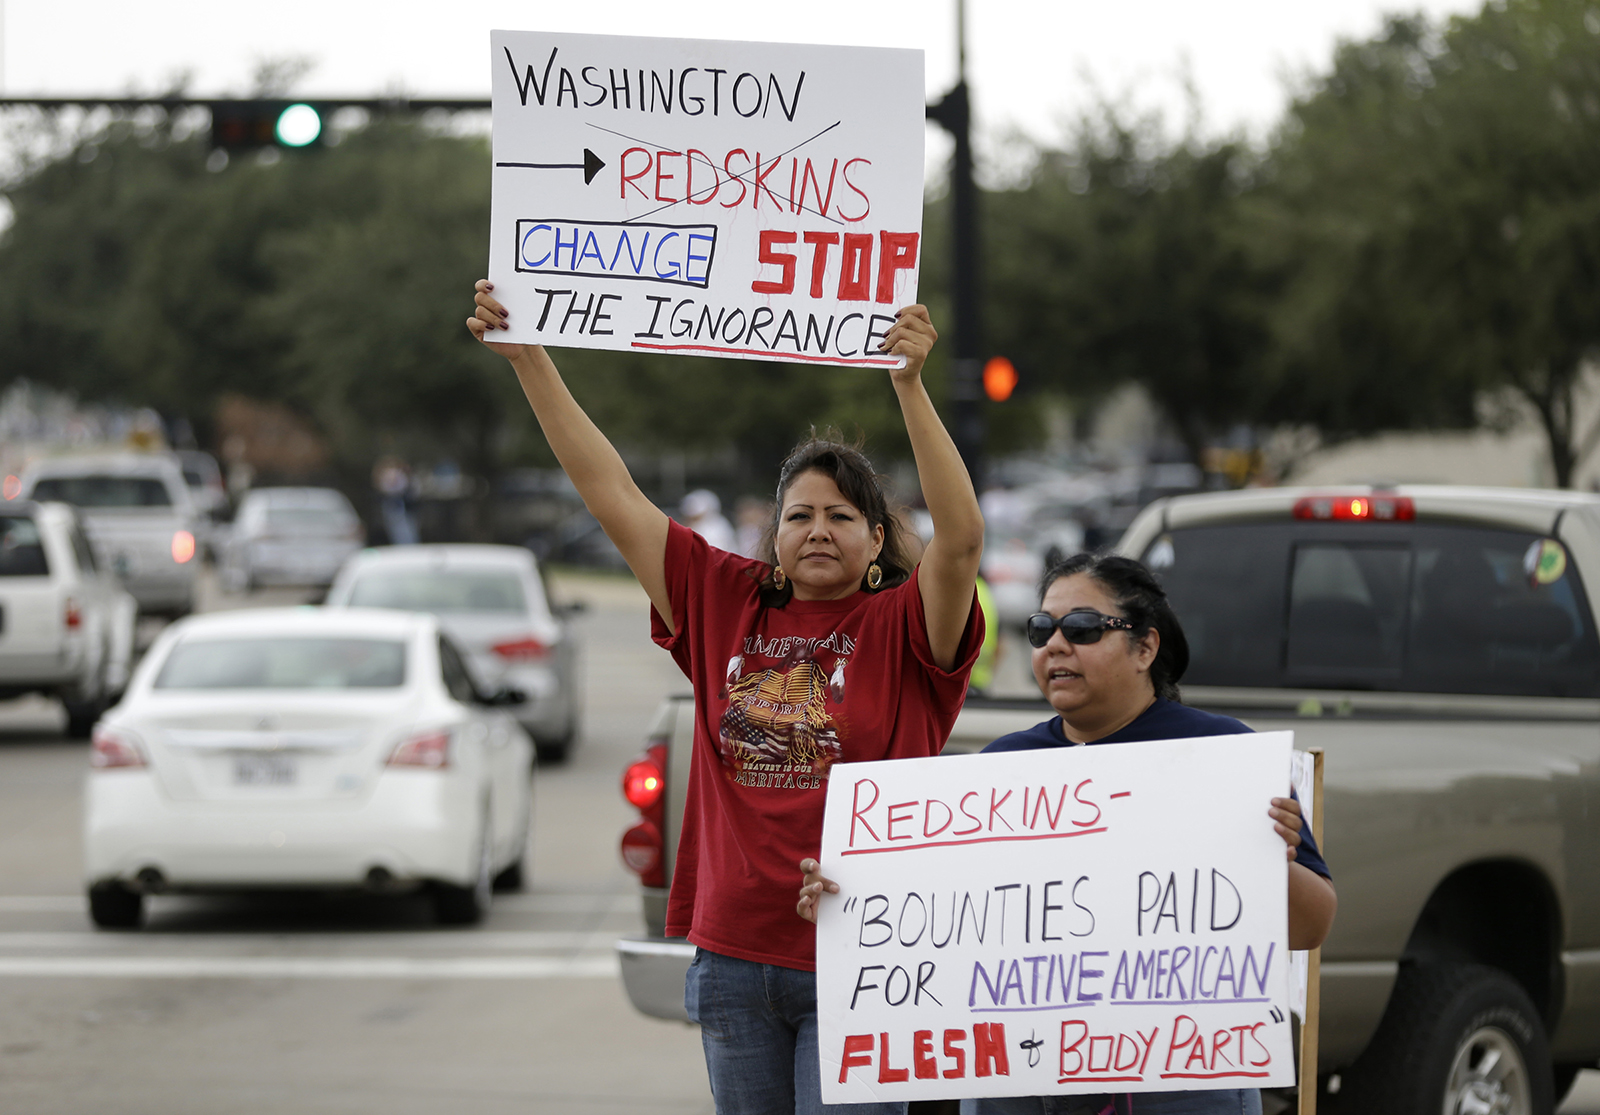 Yolonda Blue Horse, left, and Diana Parton protest with others before an NFL football game between the Dallas Cowboys and Washington Redskins, Sunday, October 13, 2013, in Arlington, Texas. (AP Photo/LM Otero)